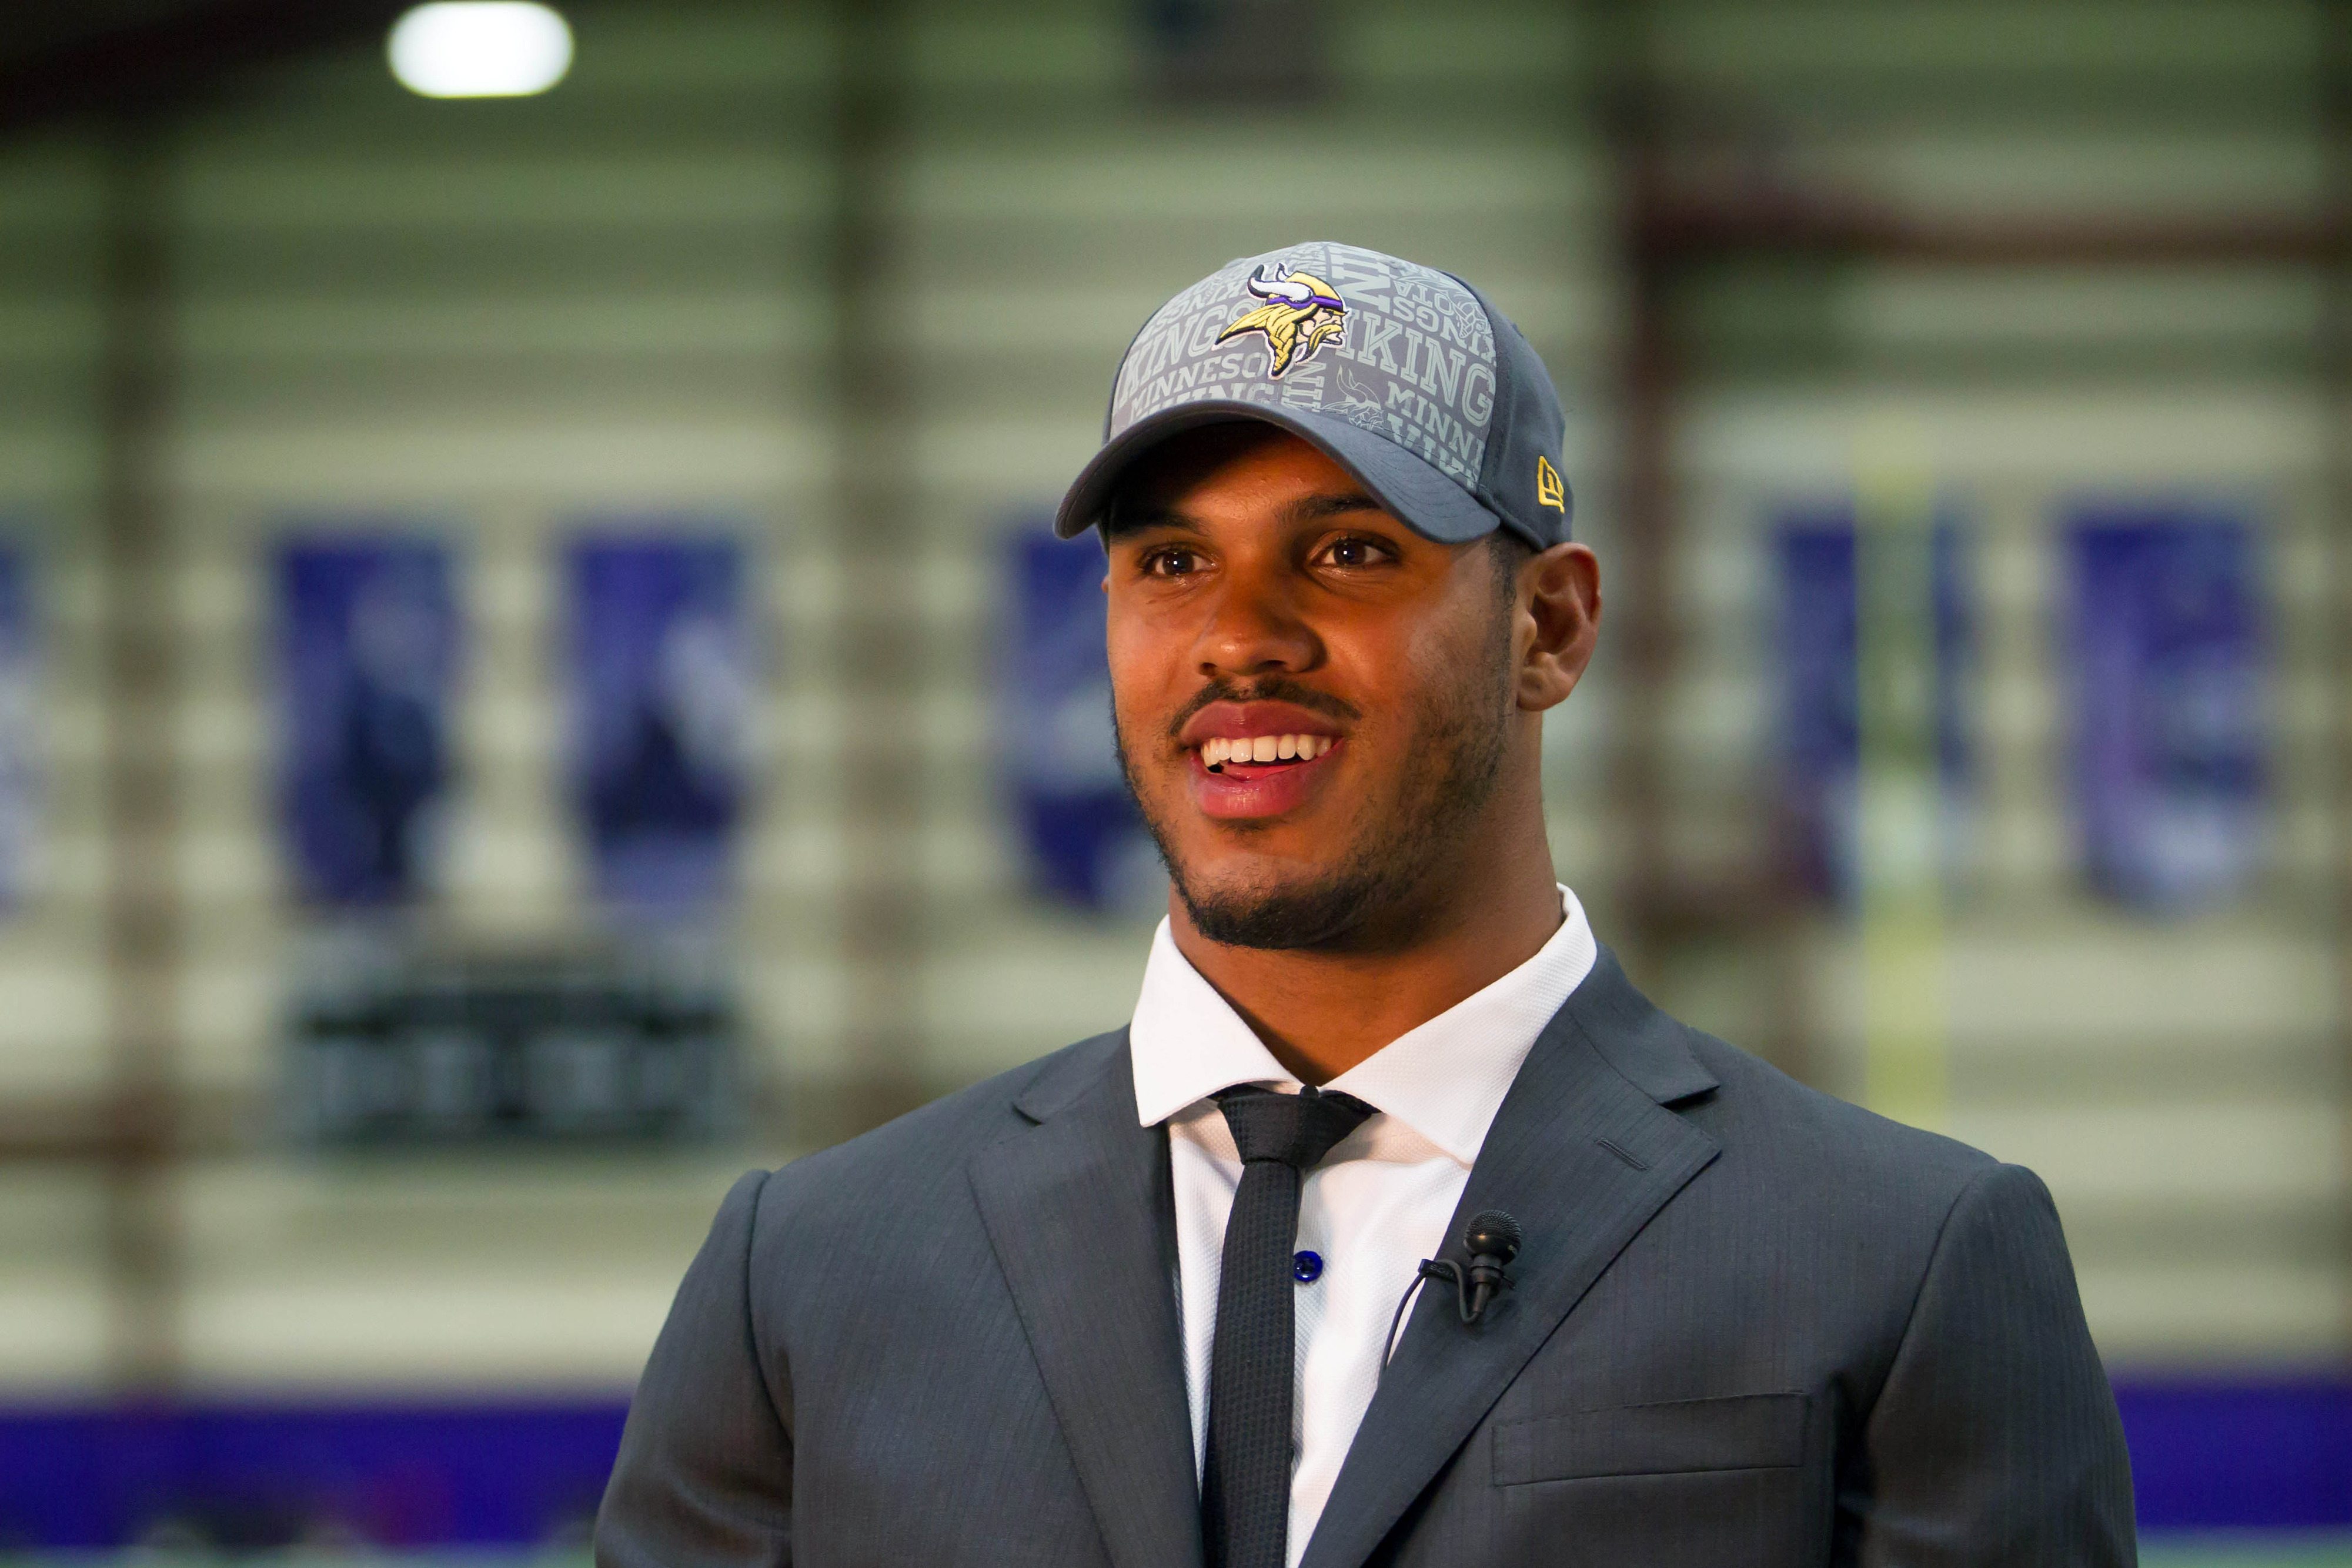 Anthony Barr leads a 2014 Vikings draft class that goes ten deep. What's the best (and worst) we could see from him?